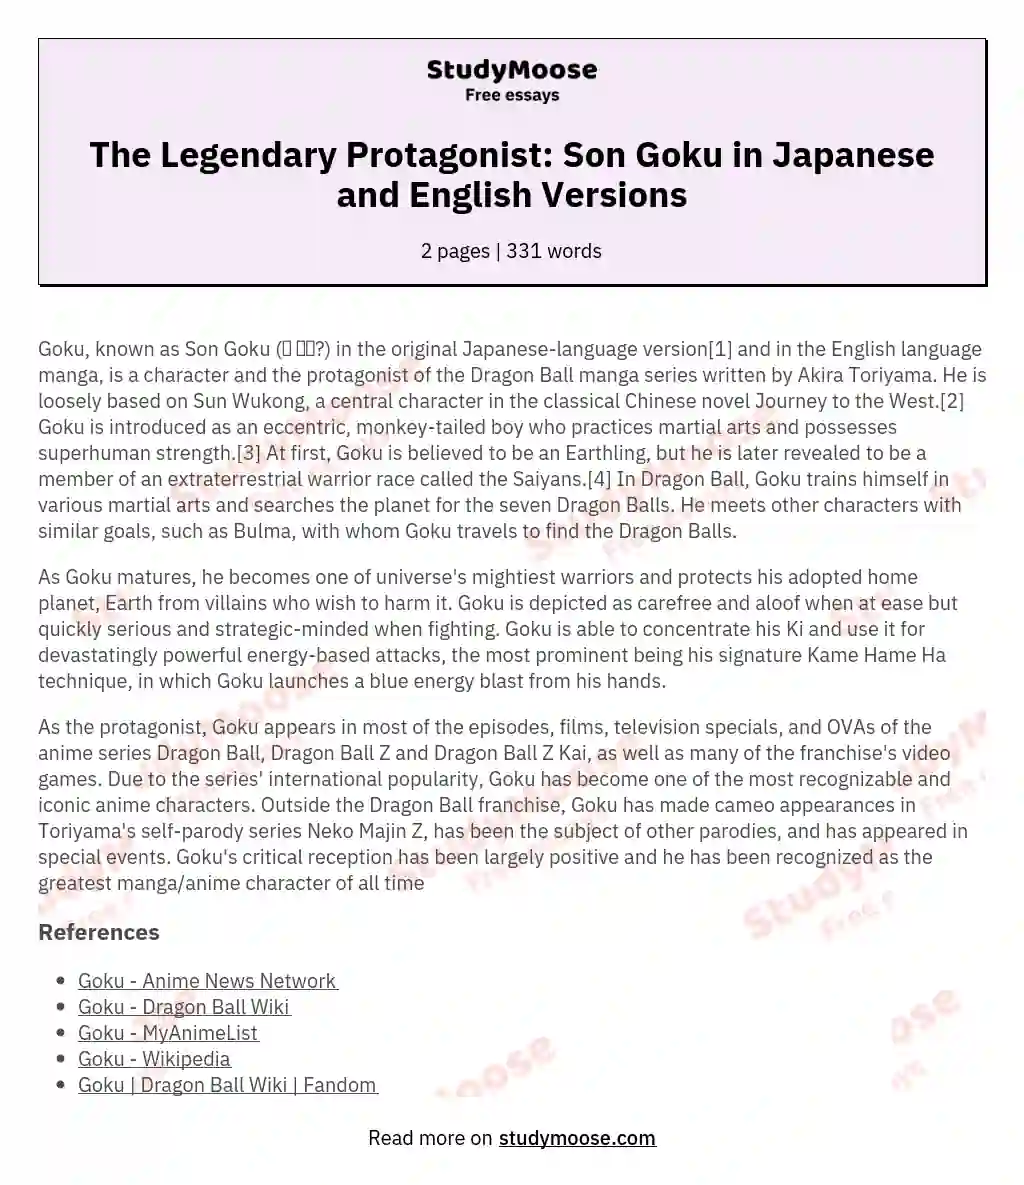 The Legendary Protagonist: Son Goku in Japanese and English Versions